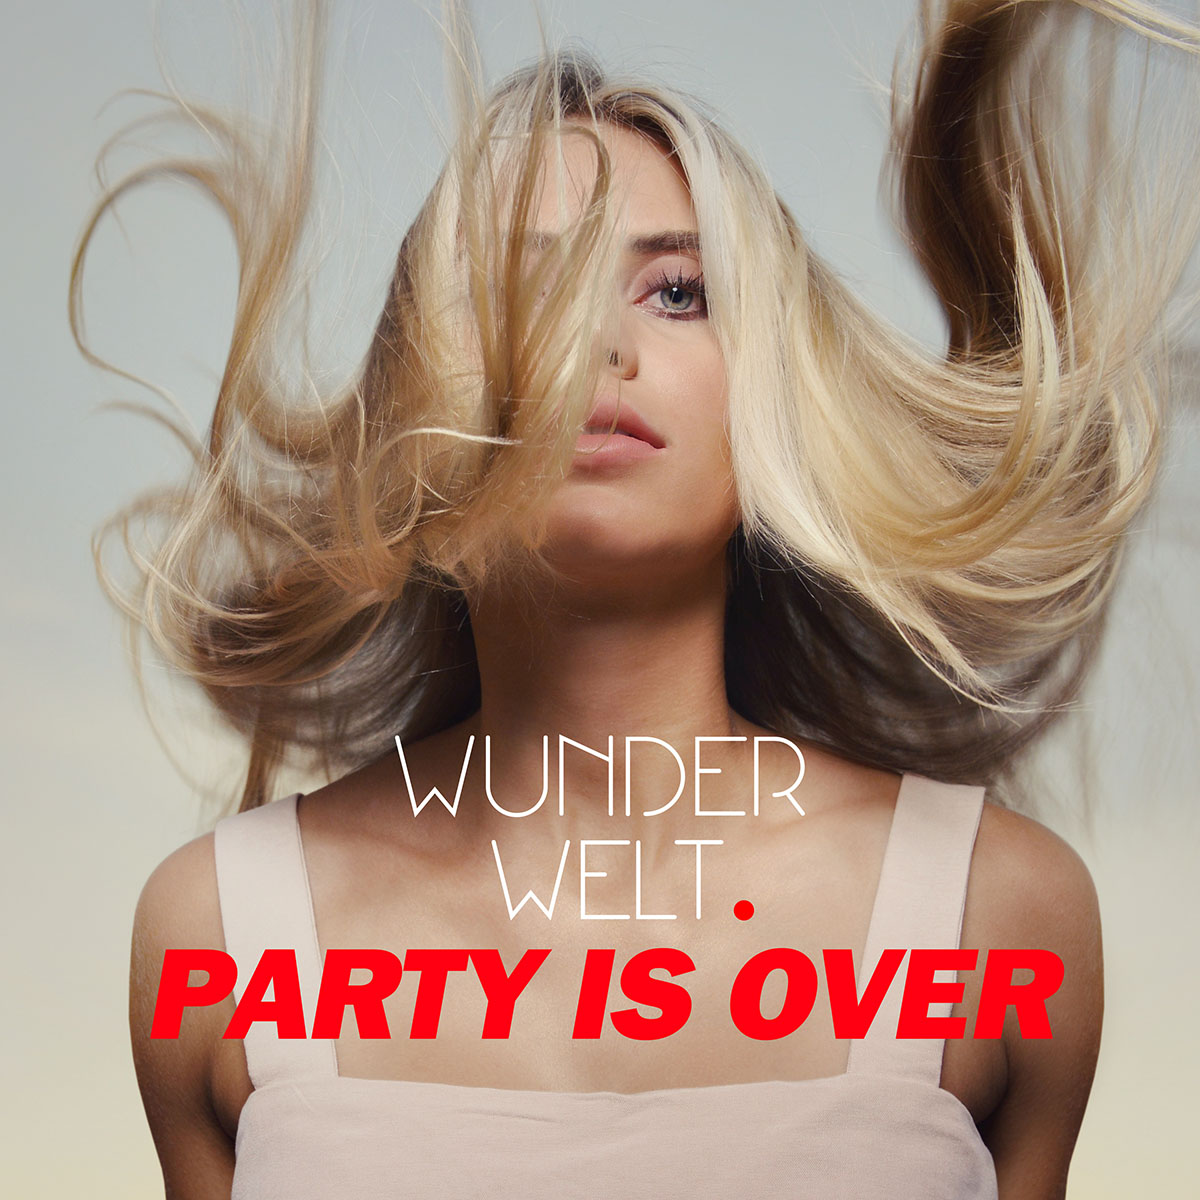 11Wunderwelt – Party Is Over 3000 x 3000 (002)